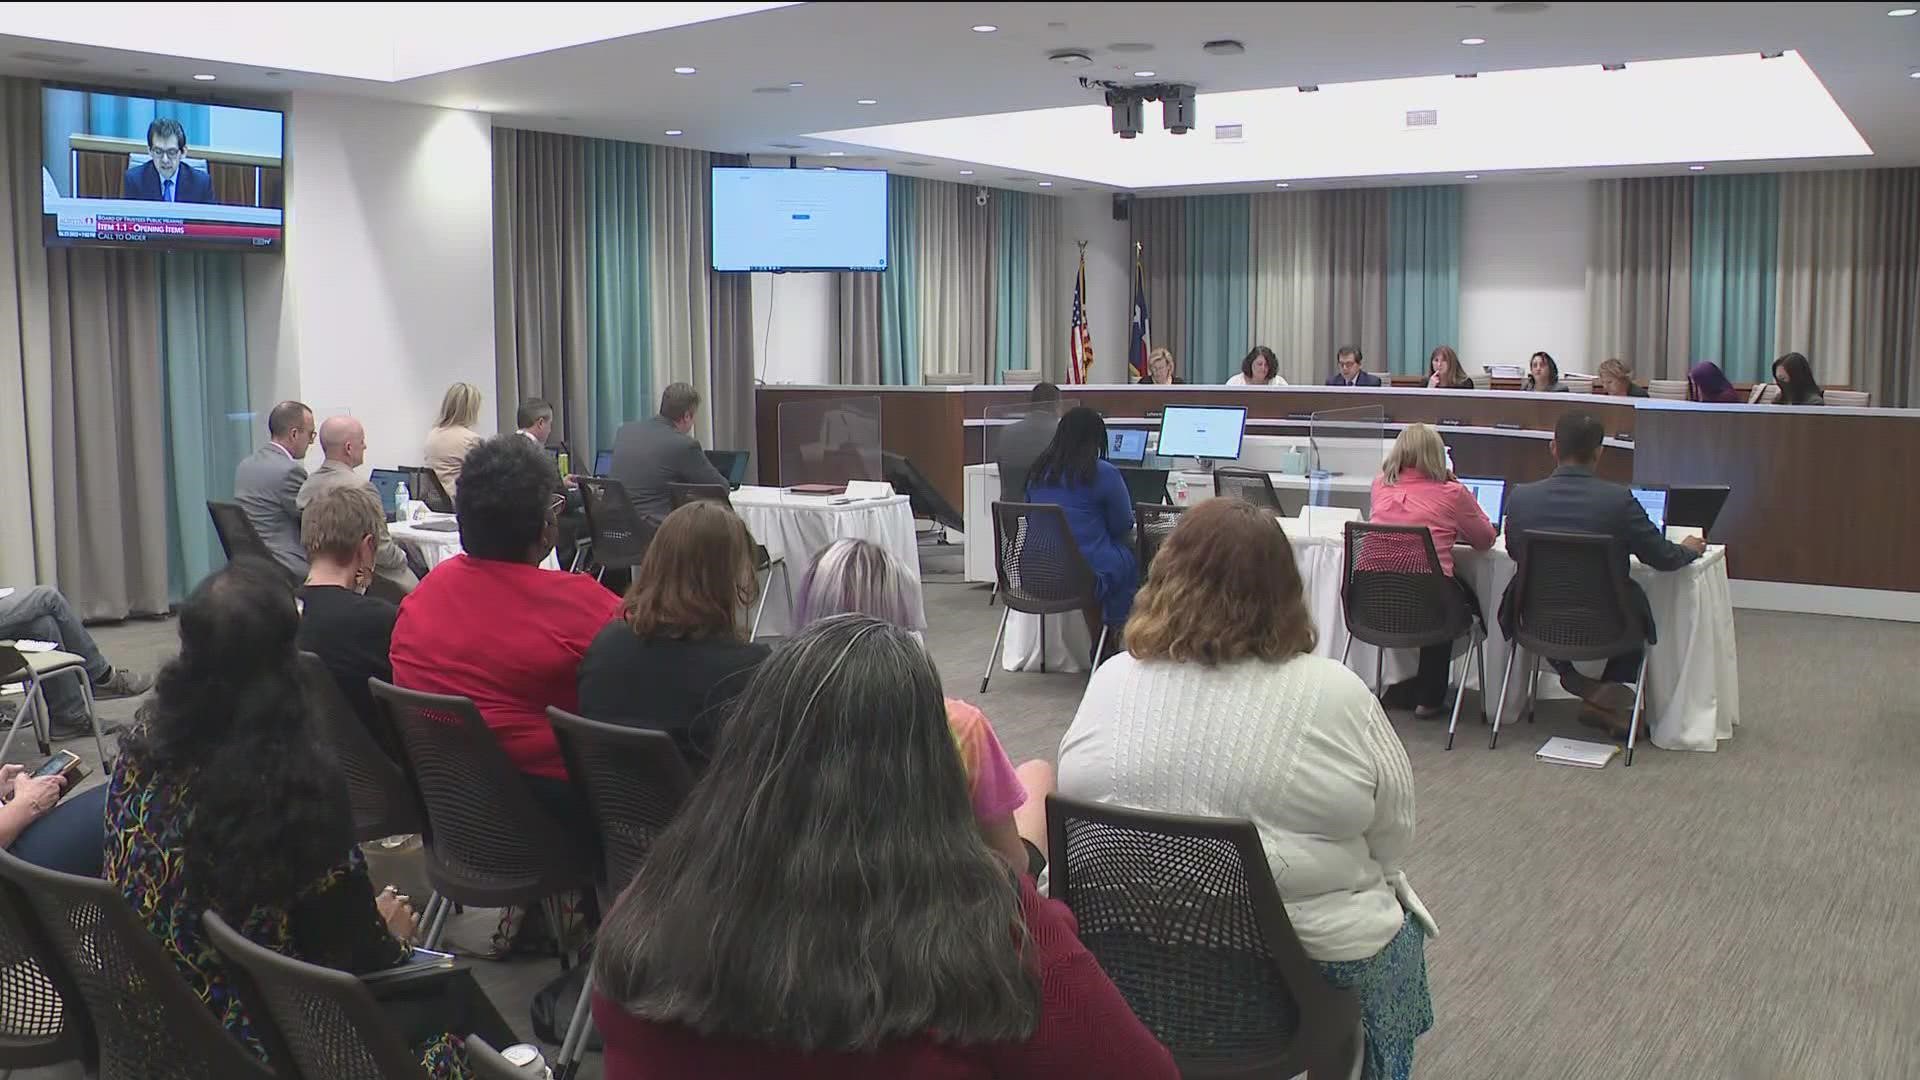 District leaders are set to approve the more than $1.6 billion dollar budget, saying it's the first time in years the district will have a balanced budget.